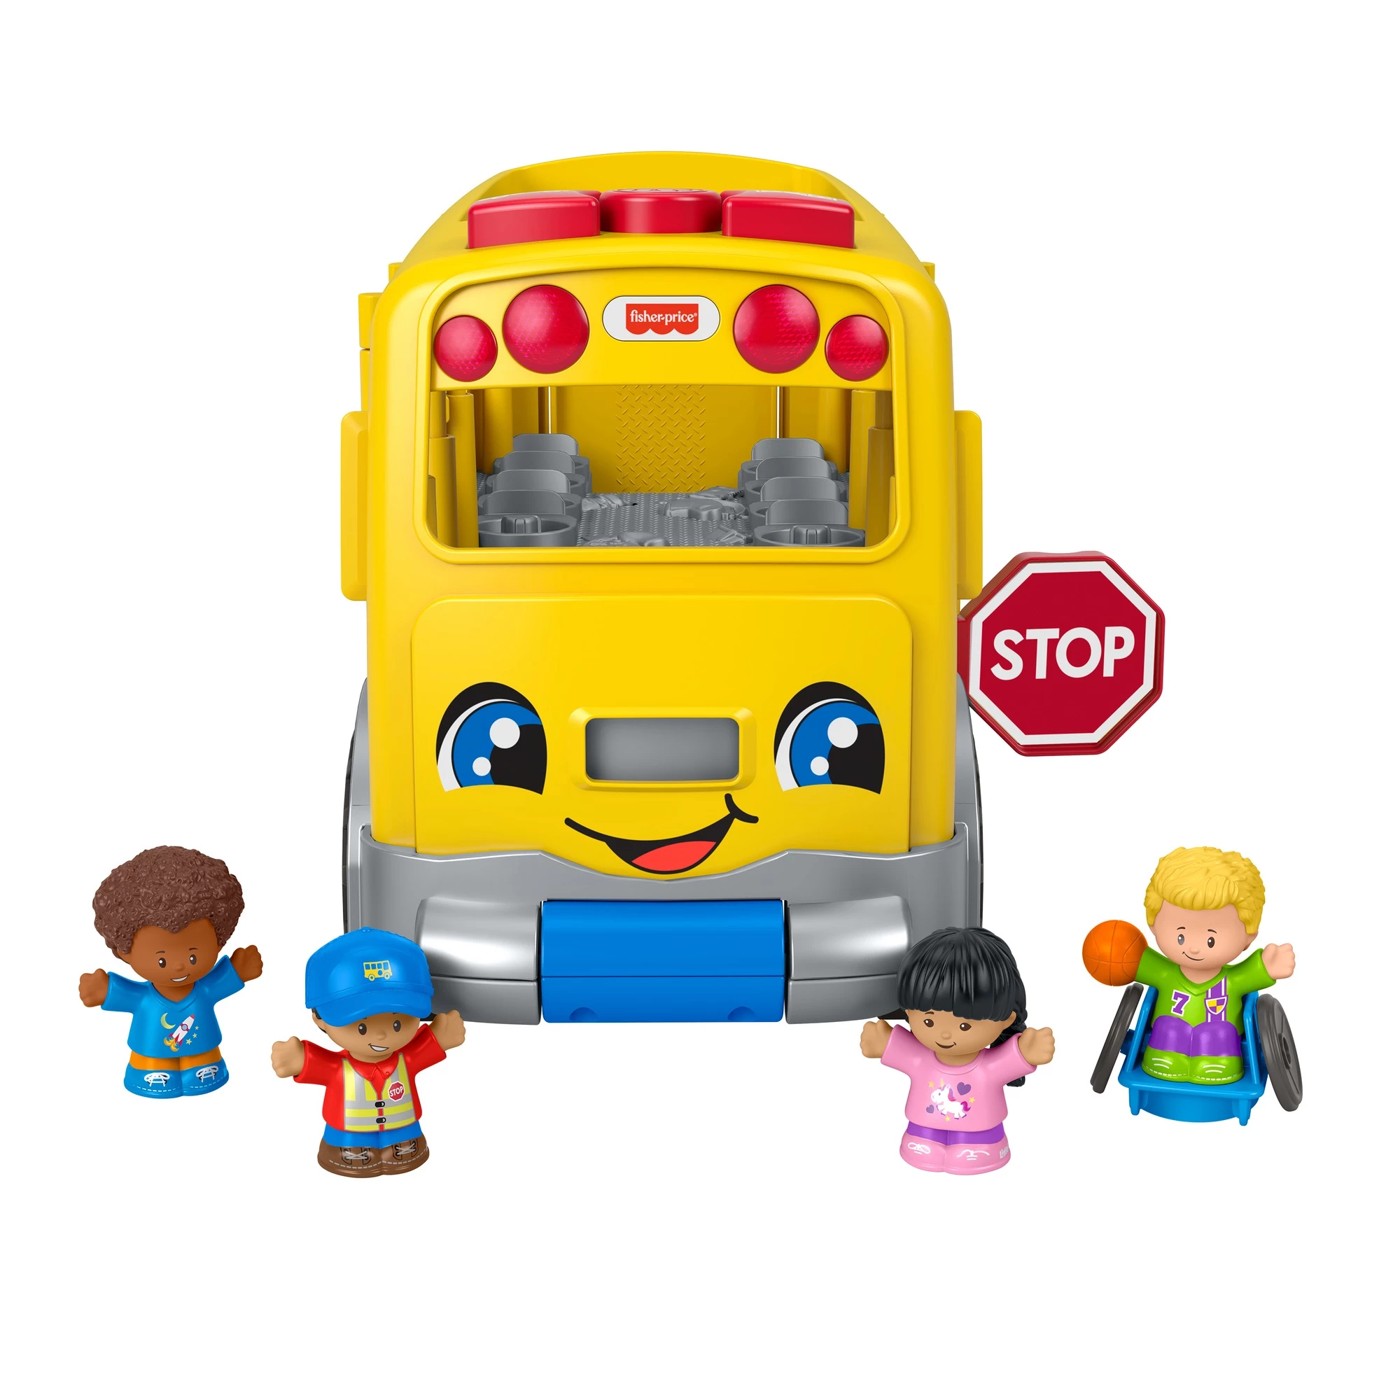 Fisher-Price Little People Big Yellow School Bus, Multicolor